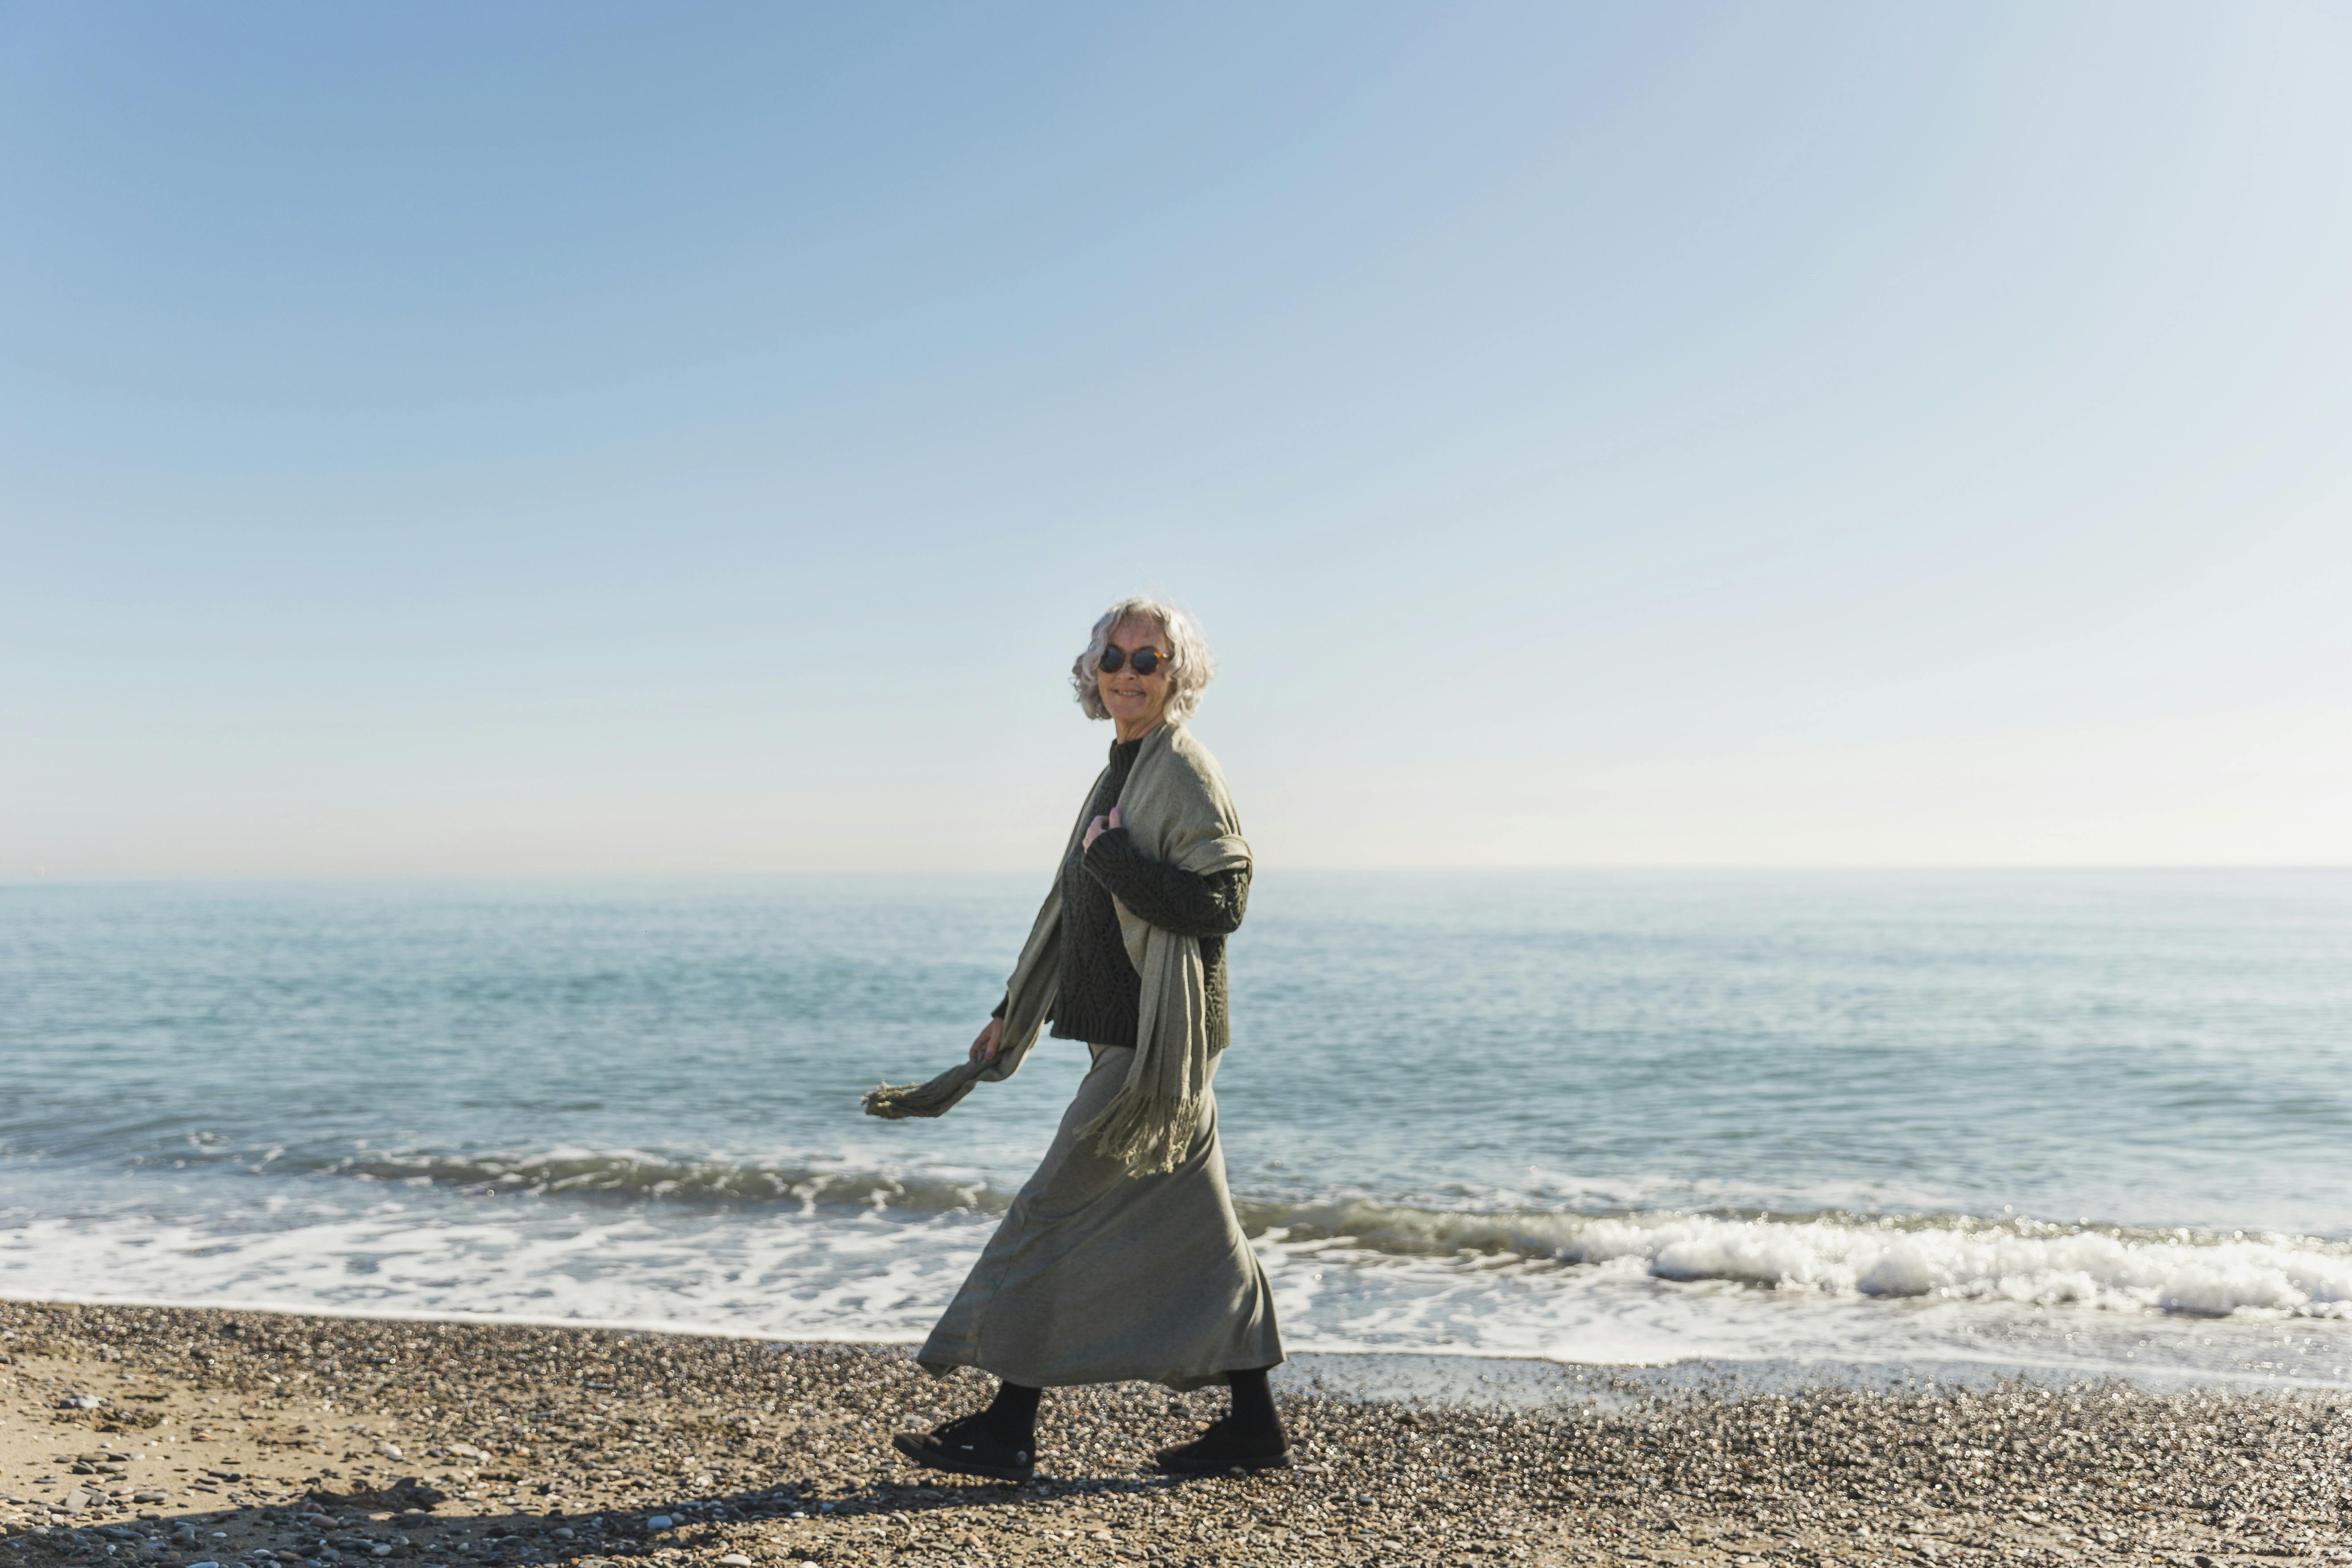 White-haired woman dressed in a shawl, walking along the shoreline of a beach.